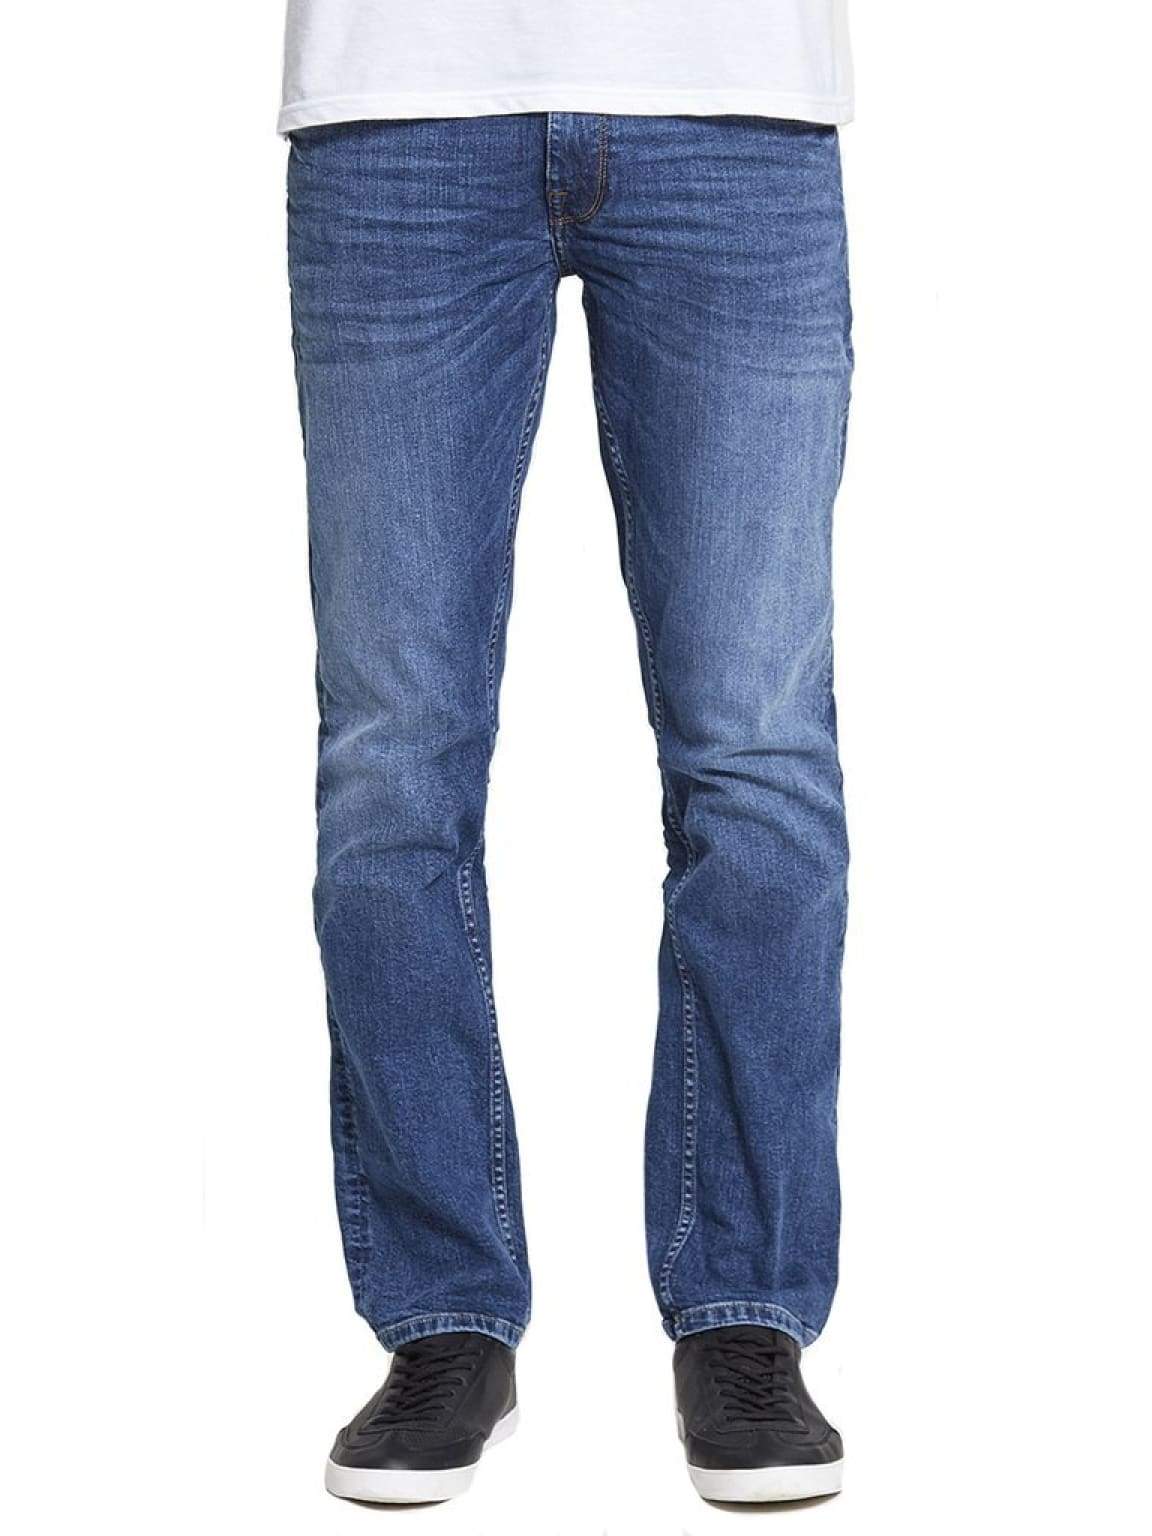 Hunter Straight Stretch Blue Jeans In Mid Wash by DML - HIRE5 Menswear